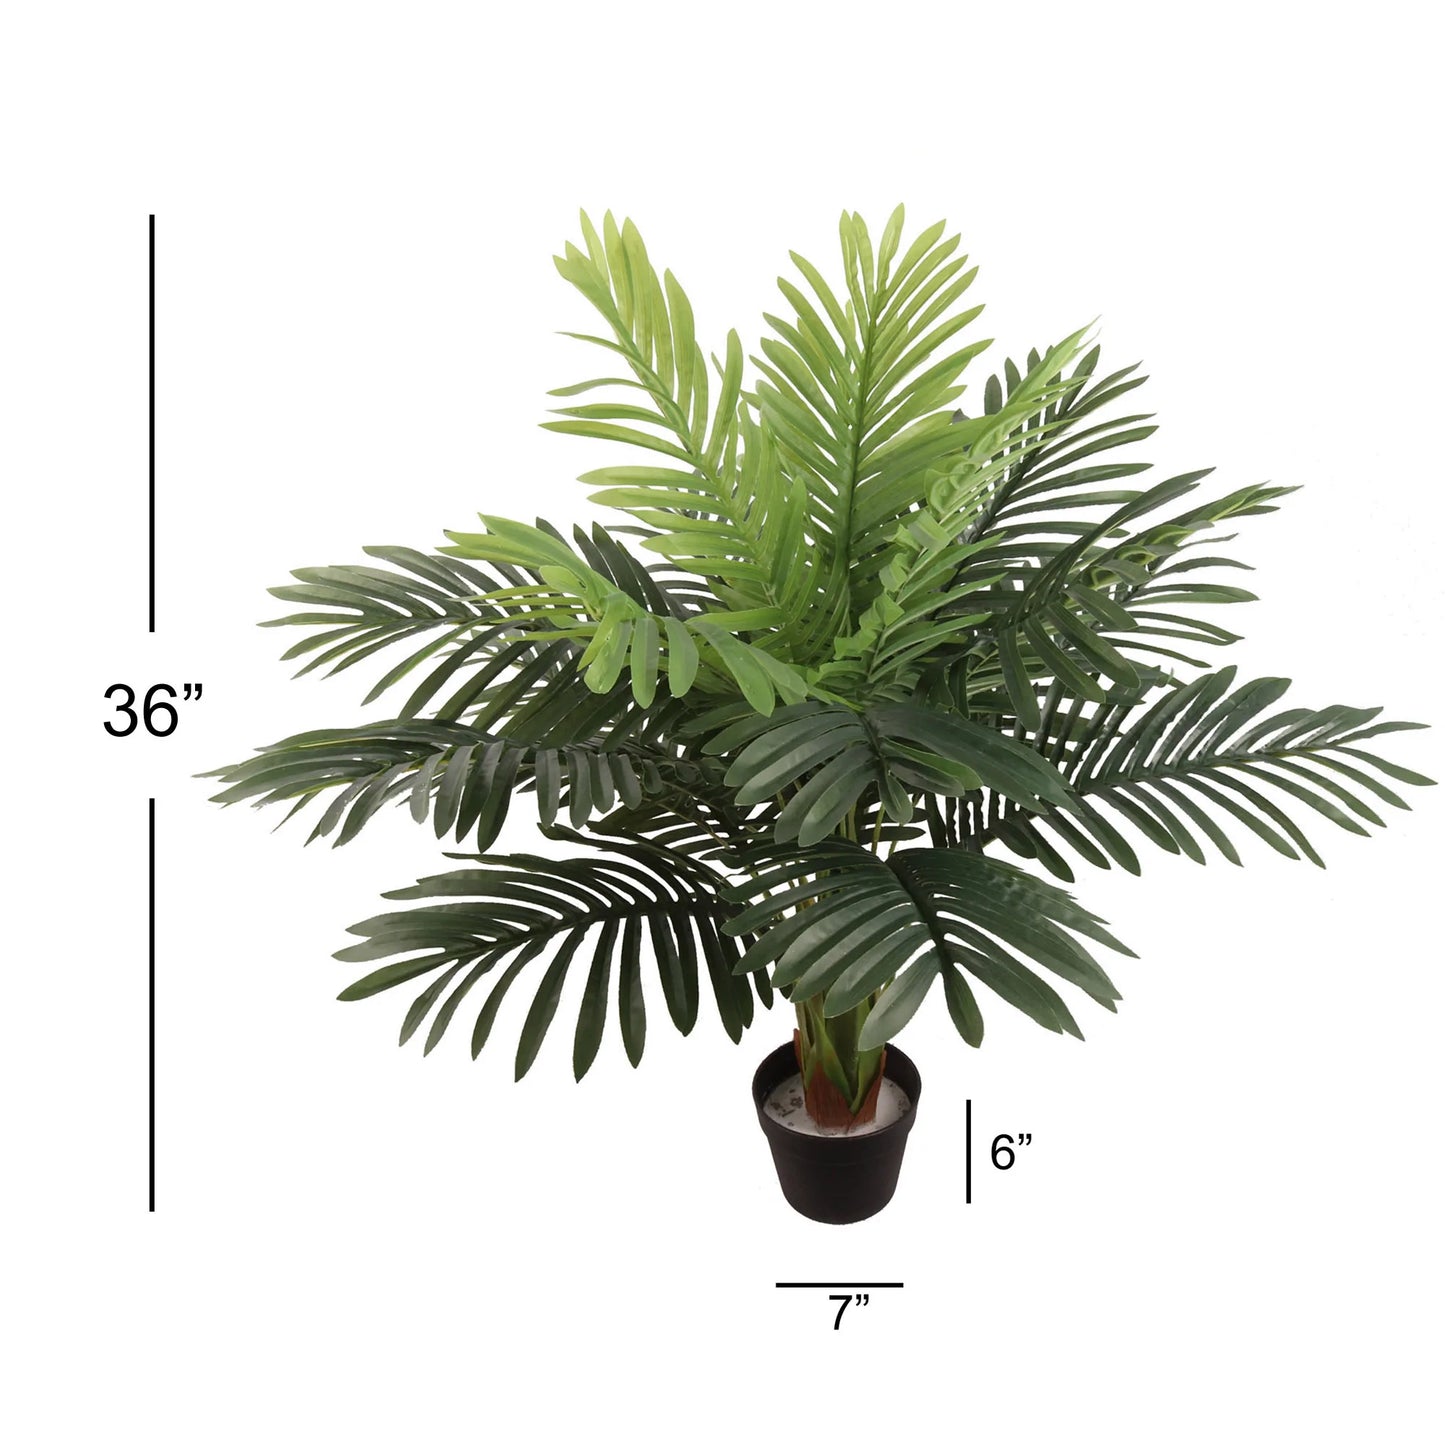 Artificial Areca Palm Tree Fan Palm House Plant in Black Pot 122 Leaves 36"